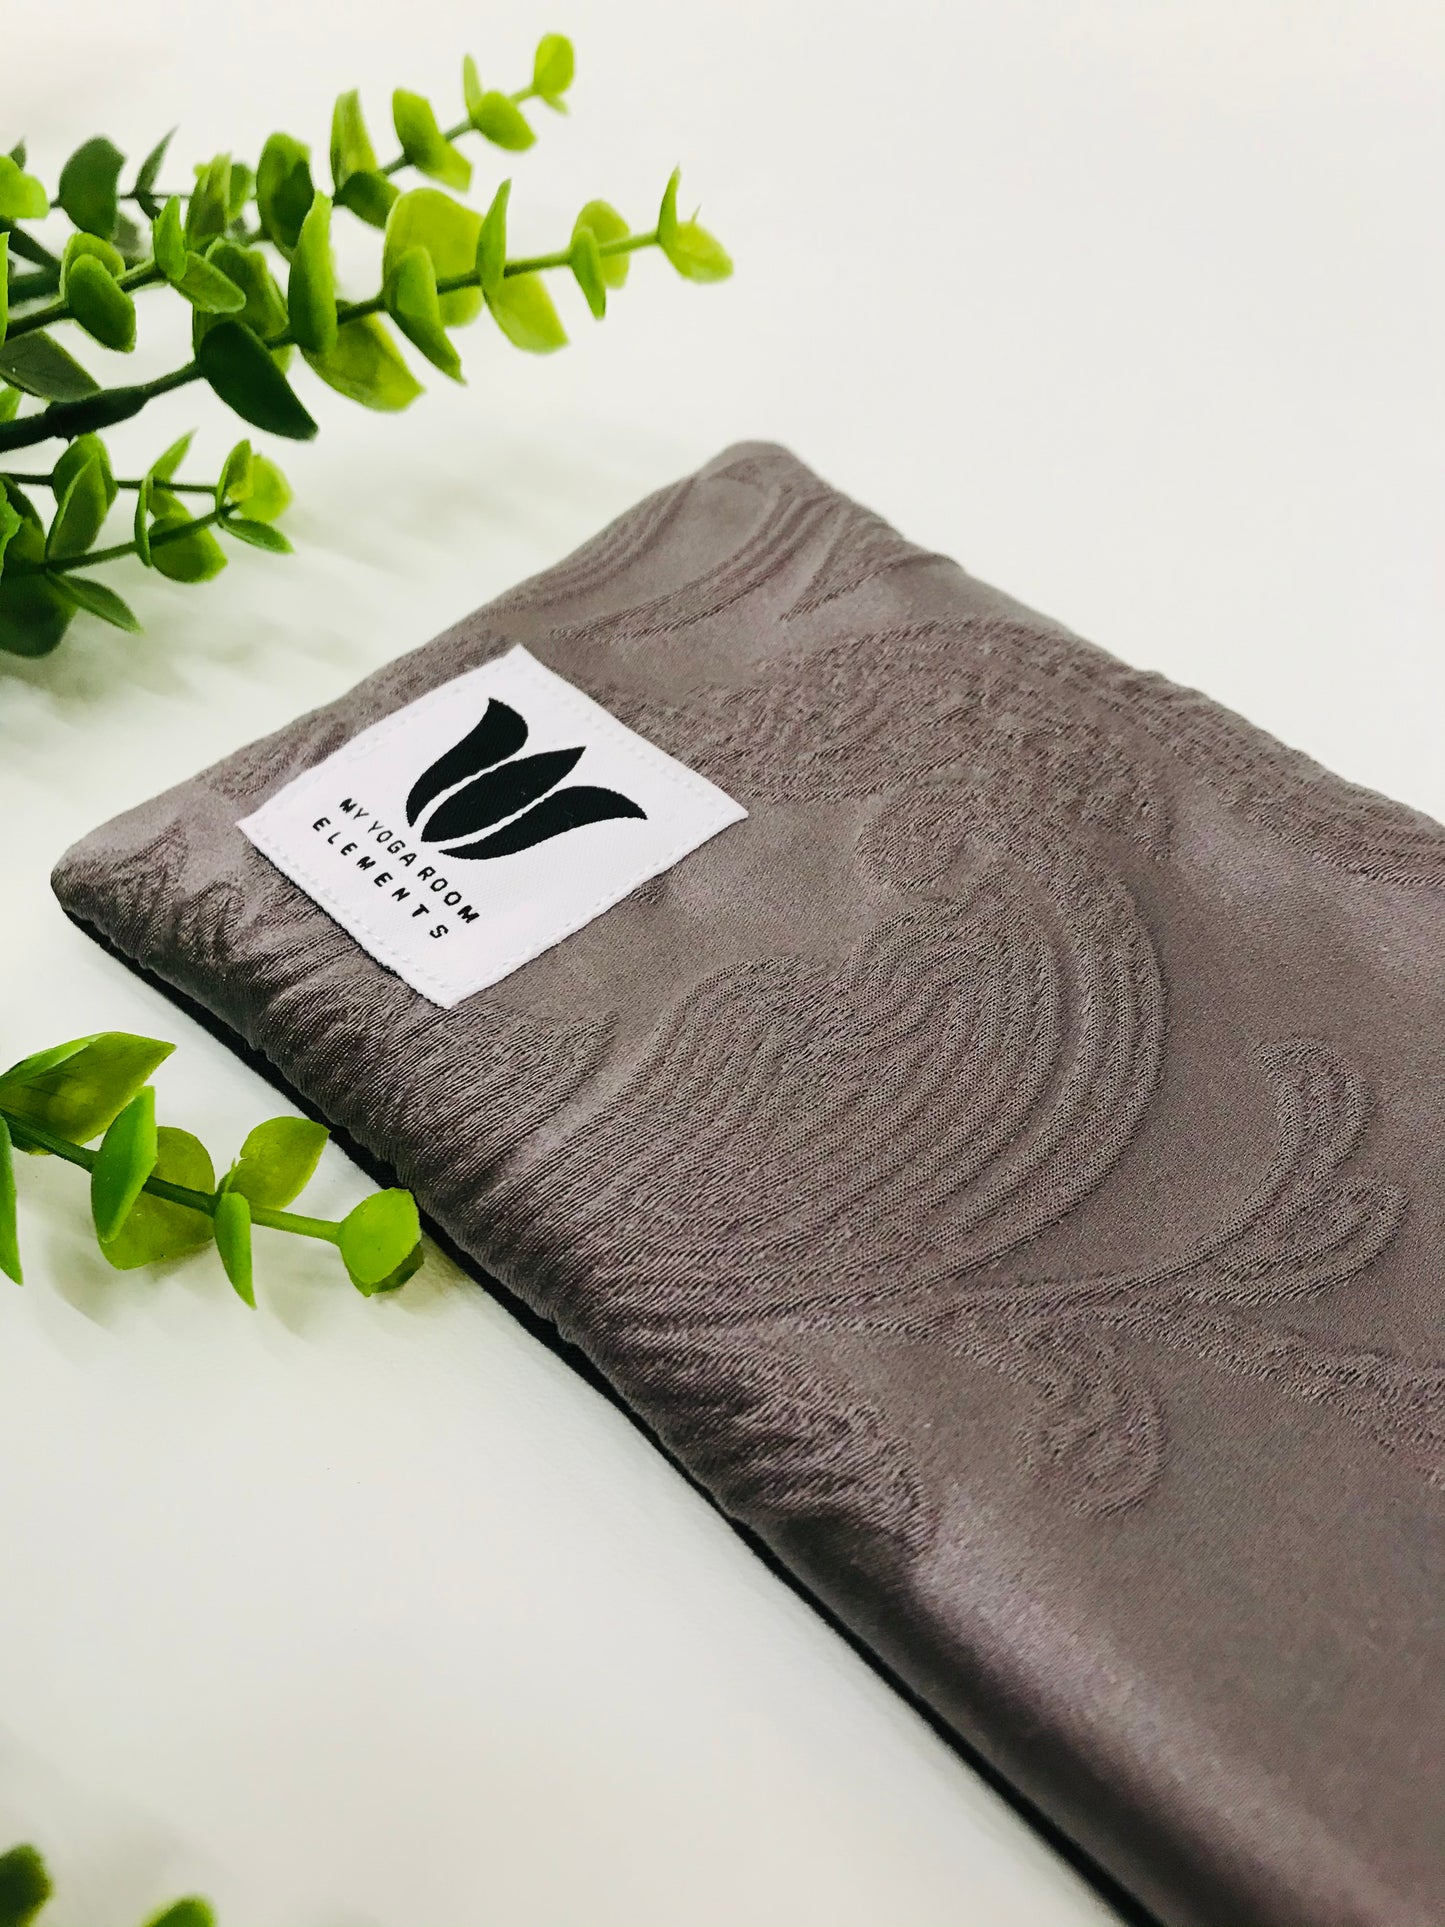 Yoga eye pillow, unscented, therapeutically weighted to soothe eye strain and stress or enhance your savasana. Handcrafted in Canada by My Yoga Room Elements. Purple embossed satin print and bamboo fabric.